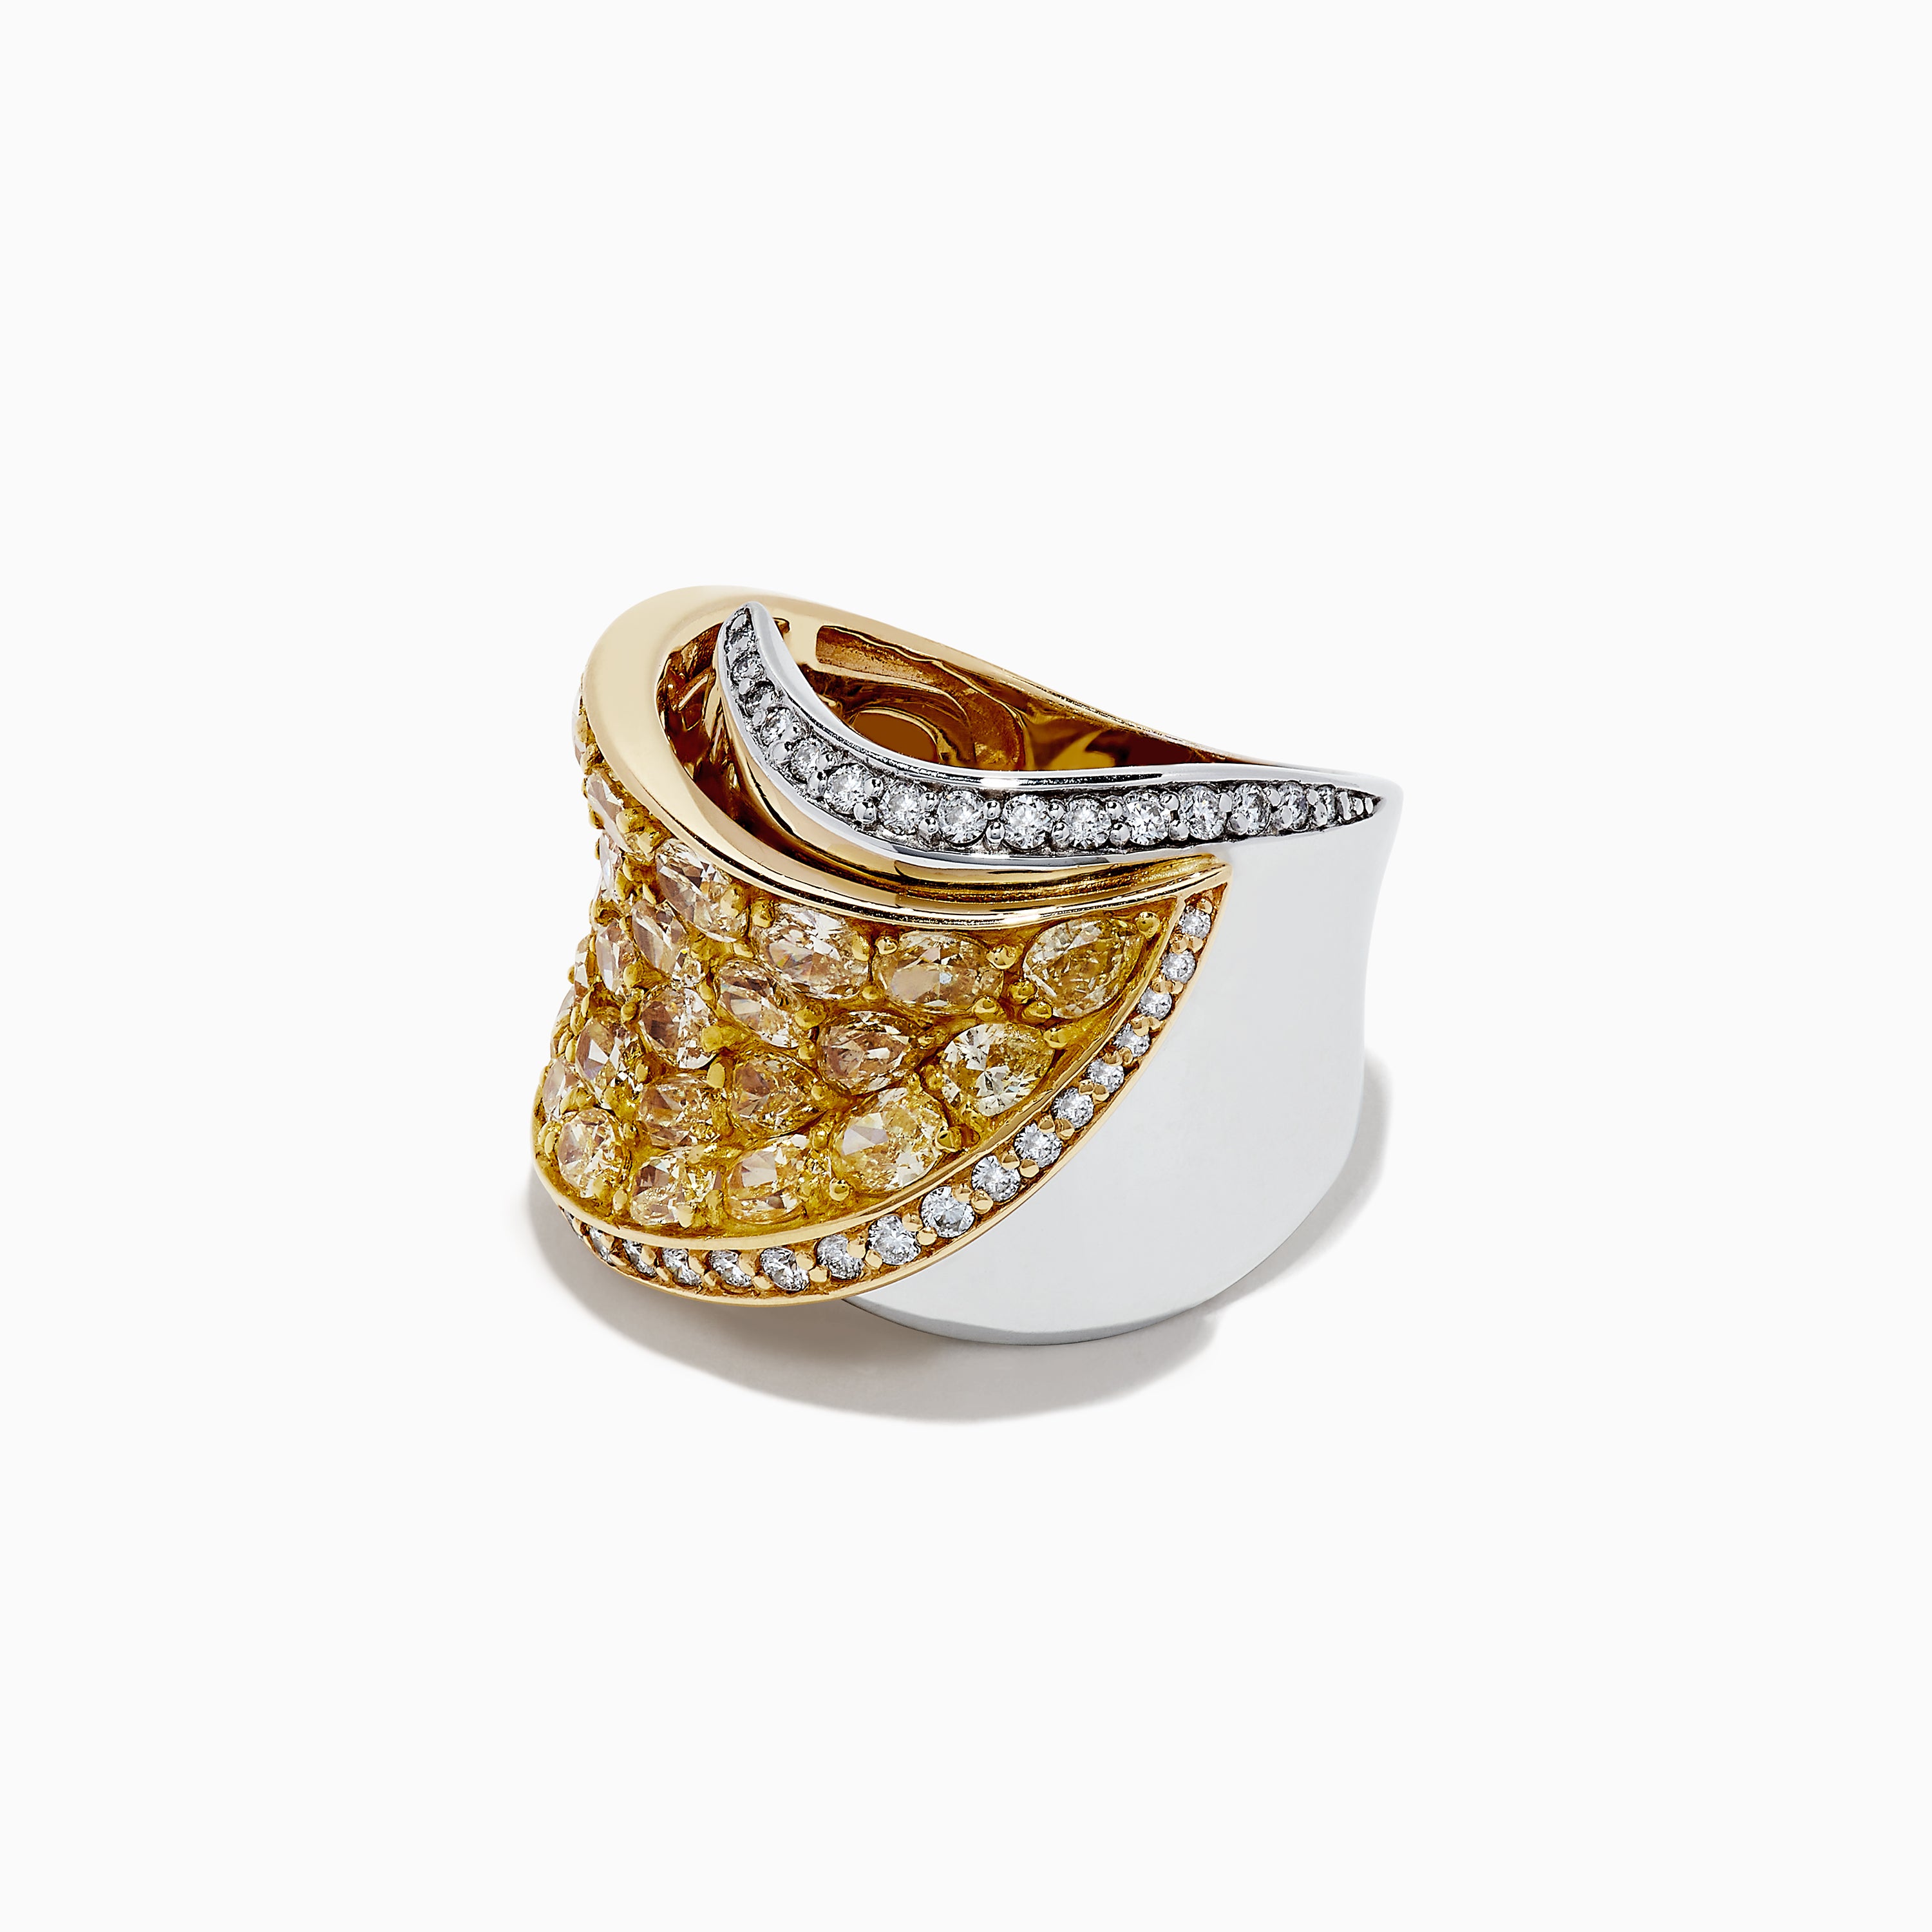 Effy Limited Edition 14K Gold Yellow and White Diamond Ring, 3.25 TCW 